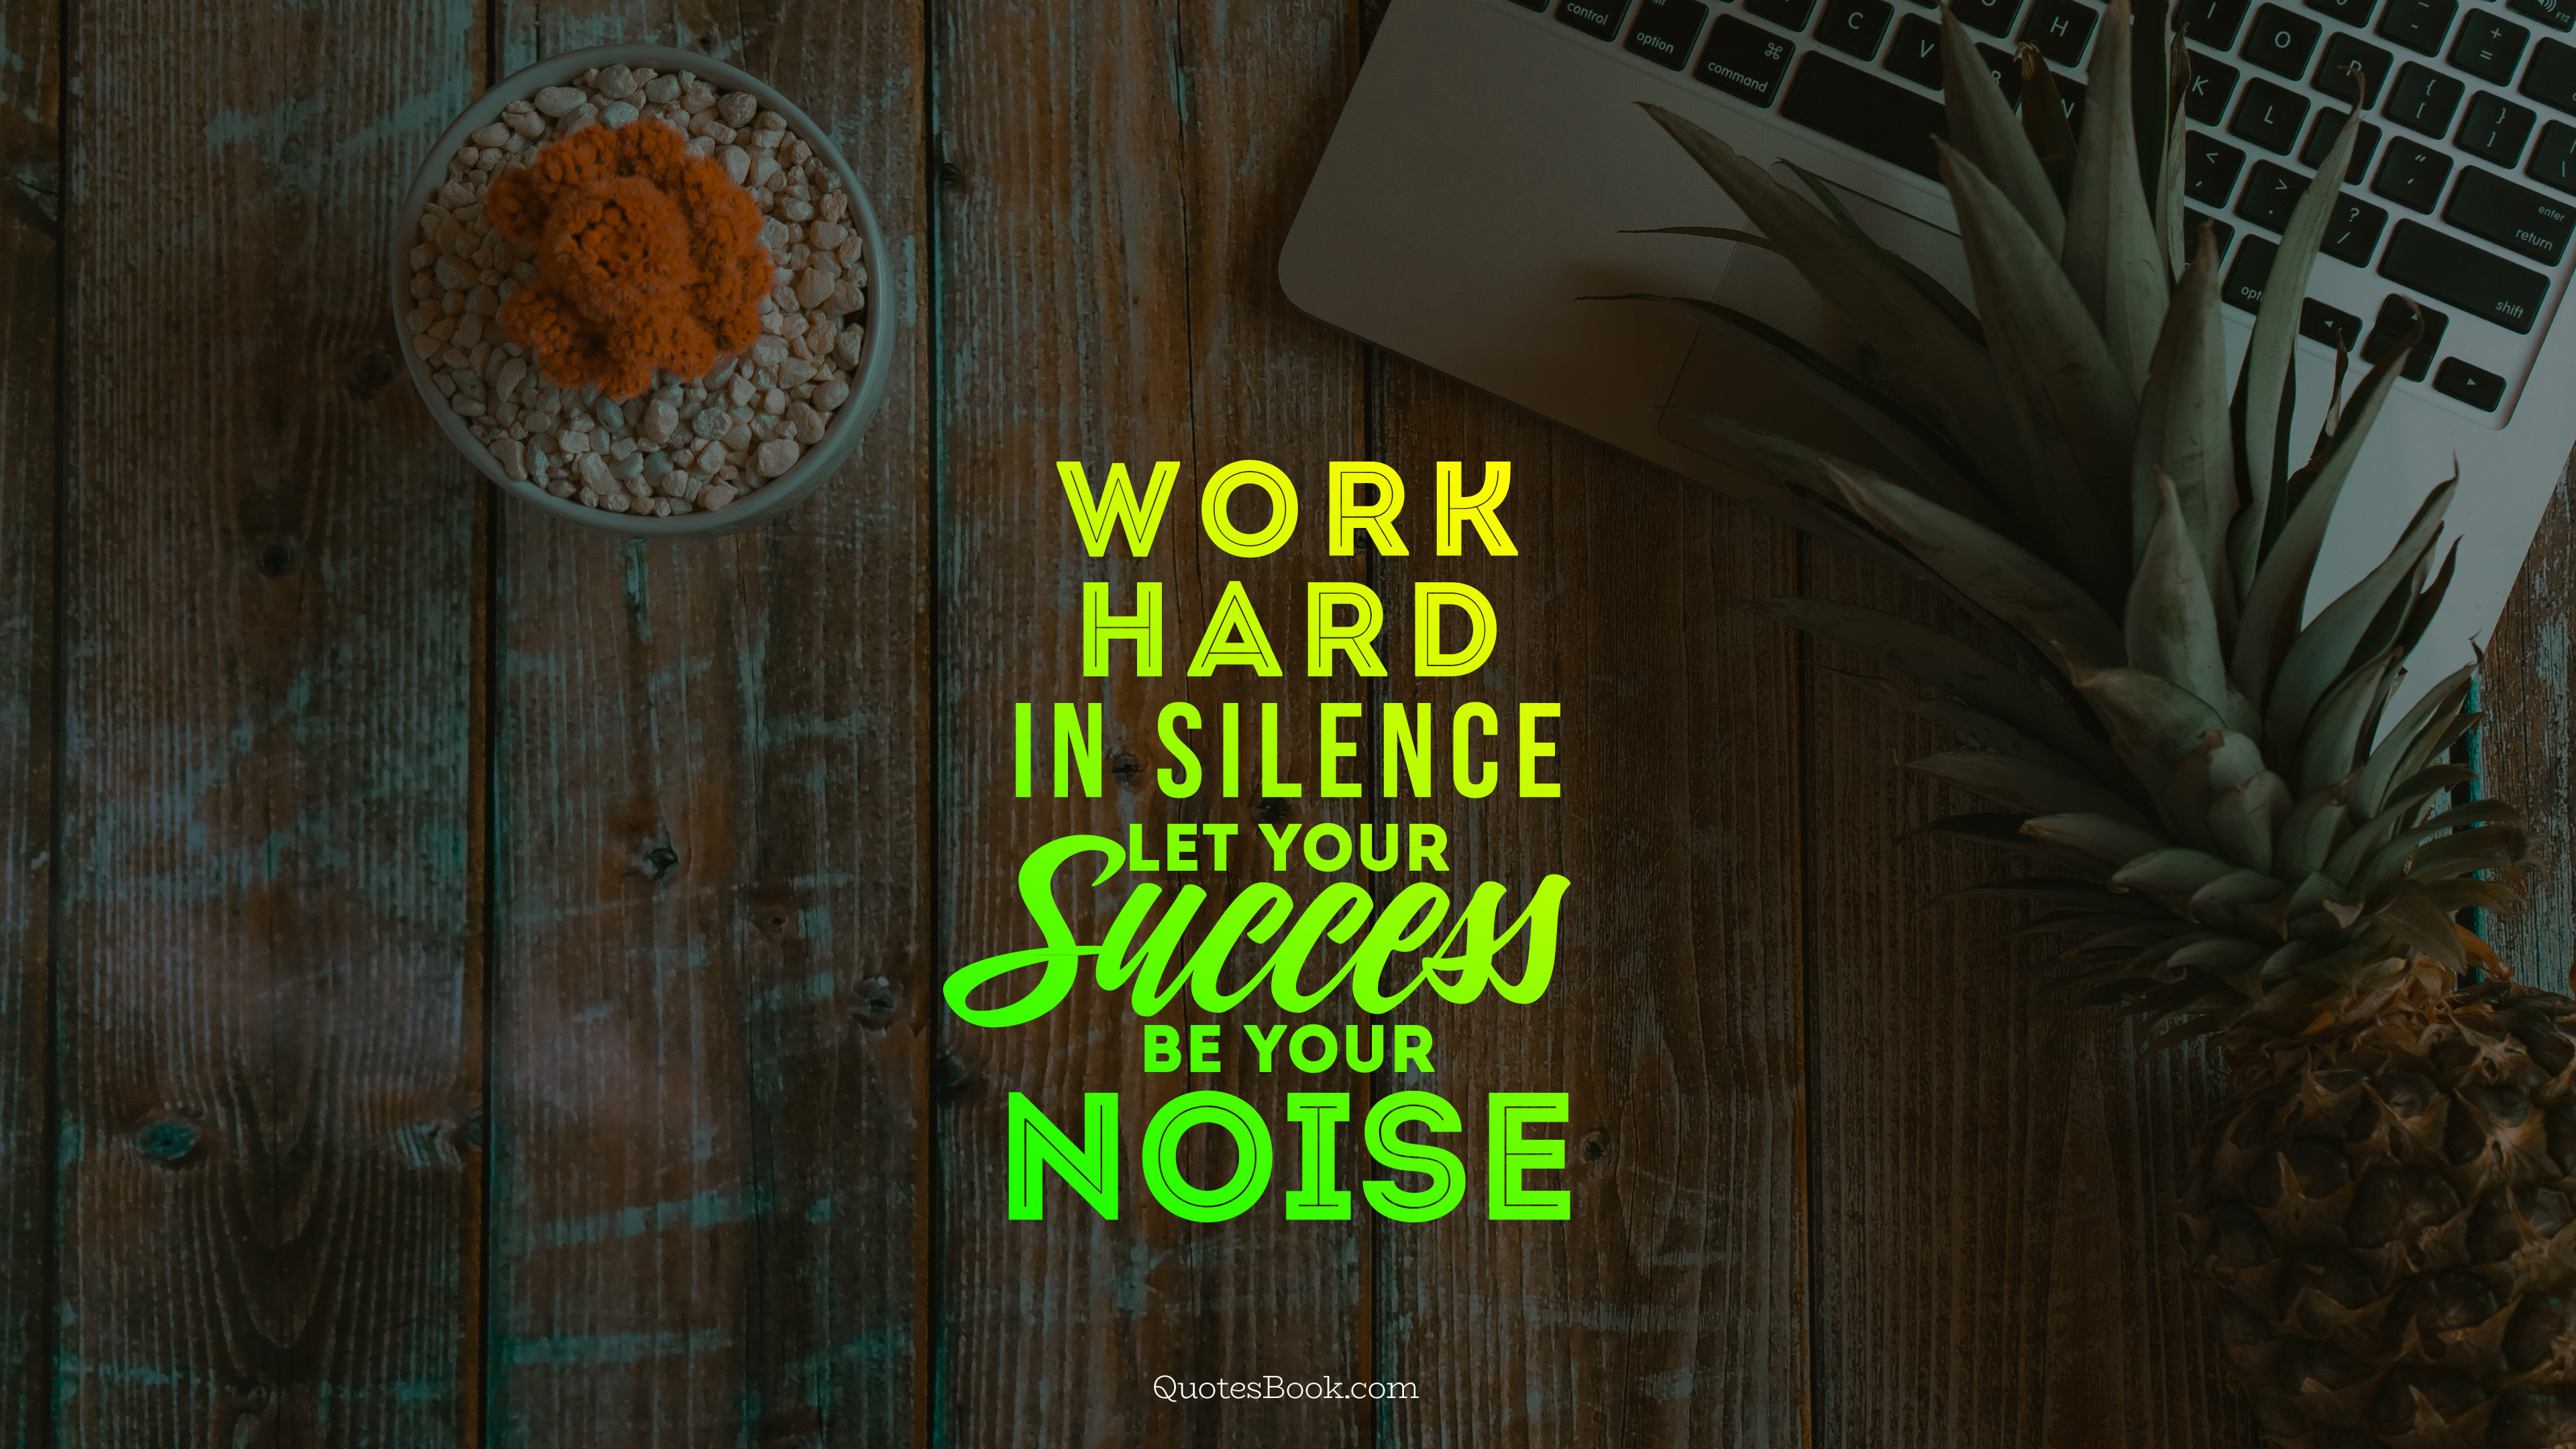 work hard in silence let your success be your noise 3840x2160 1699